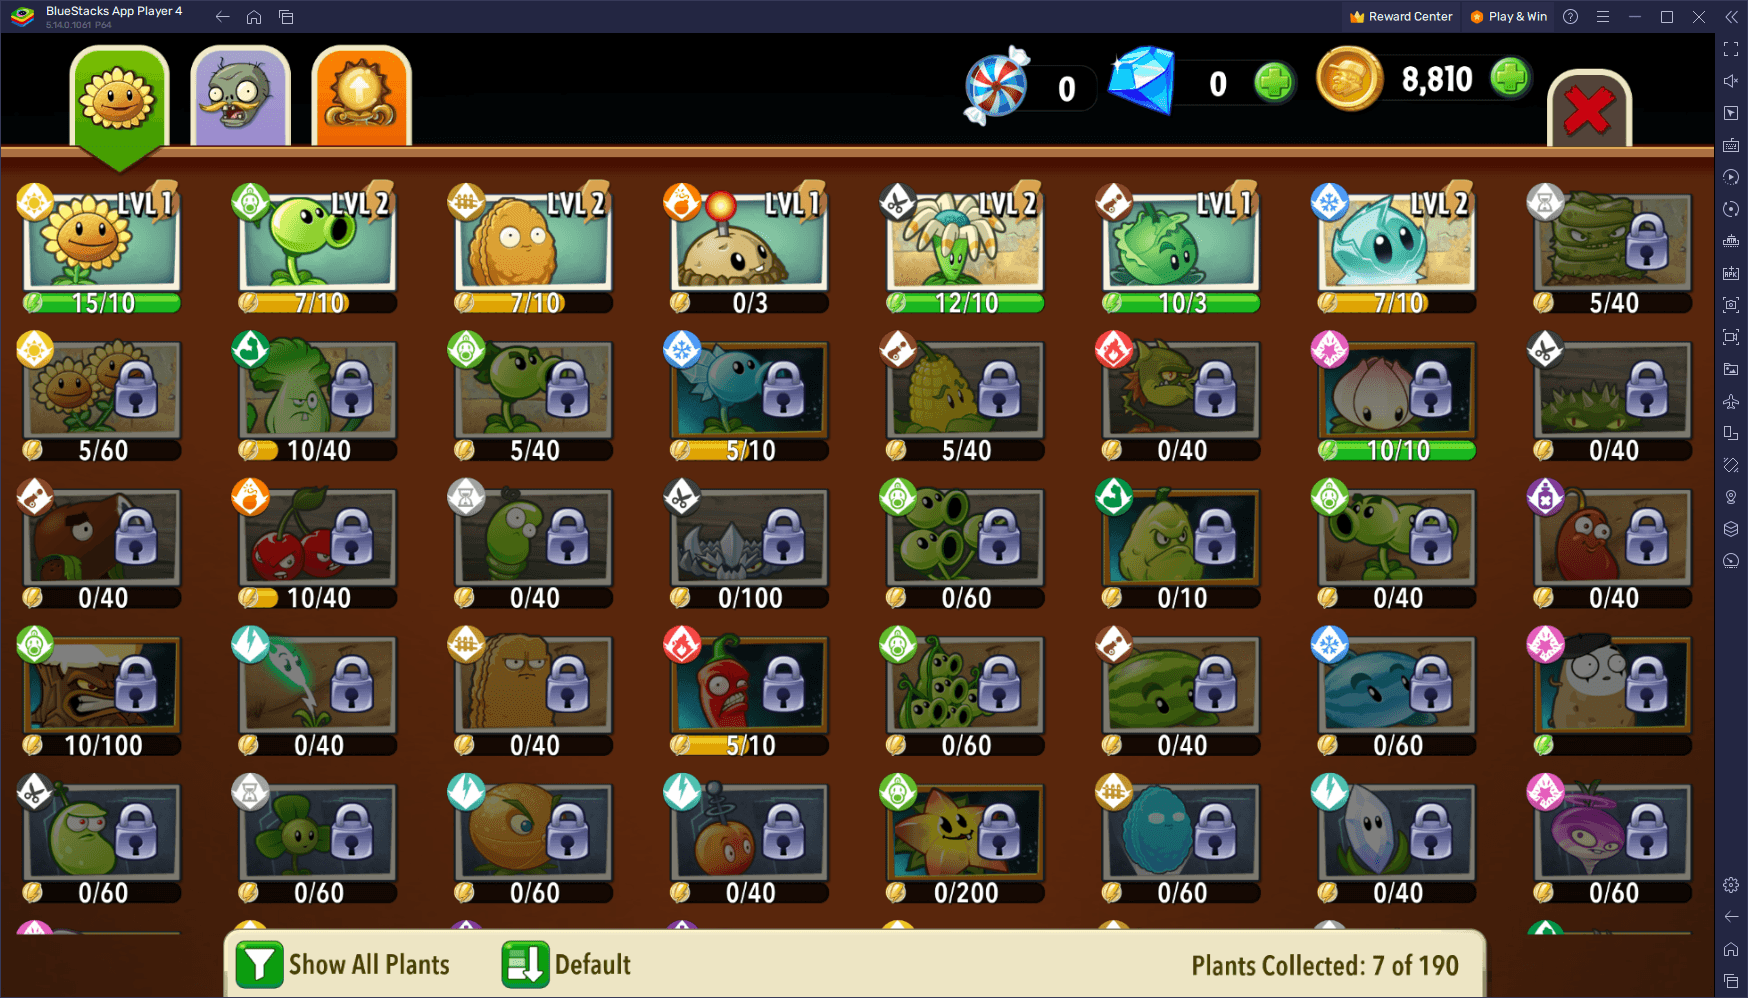 Plants vs Zombies 2 on BlueStacks – The Top 10 Plants in the Game